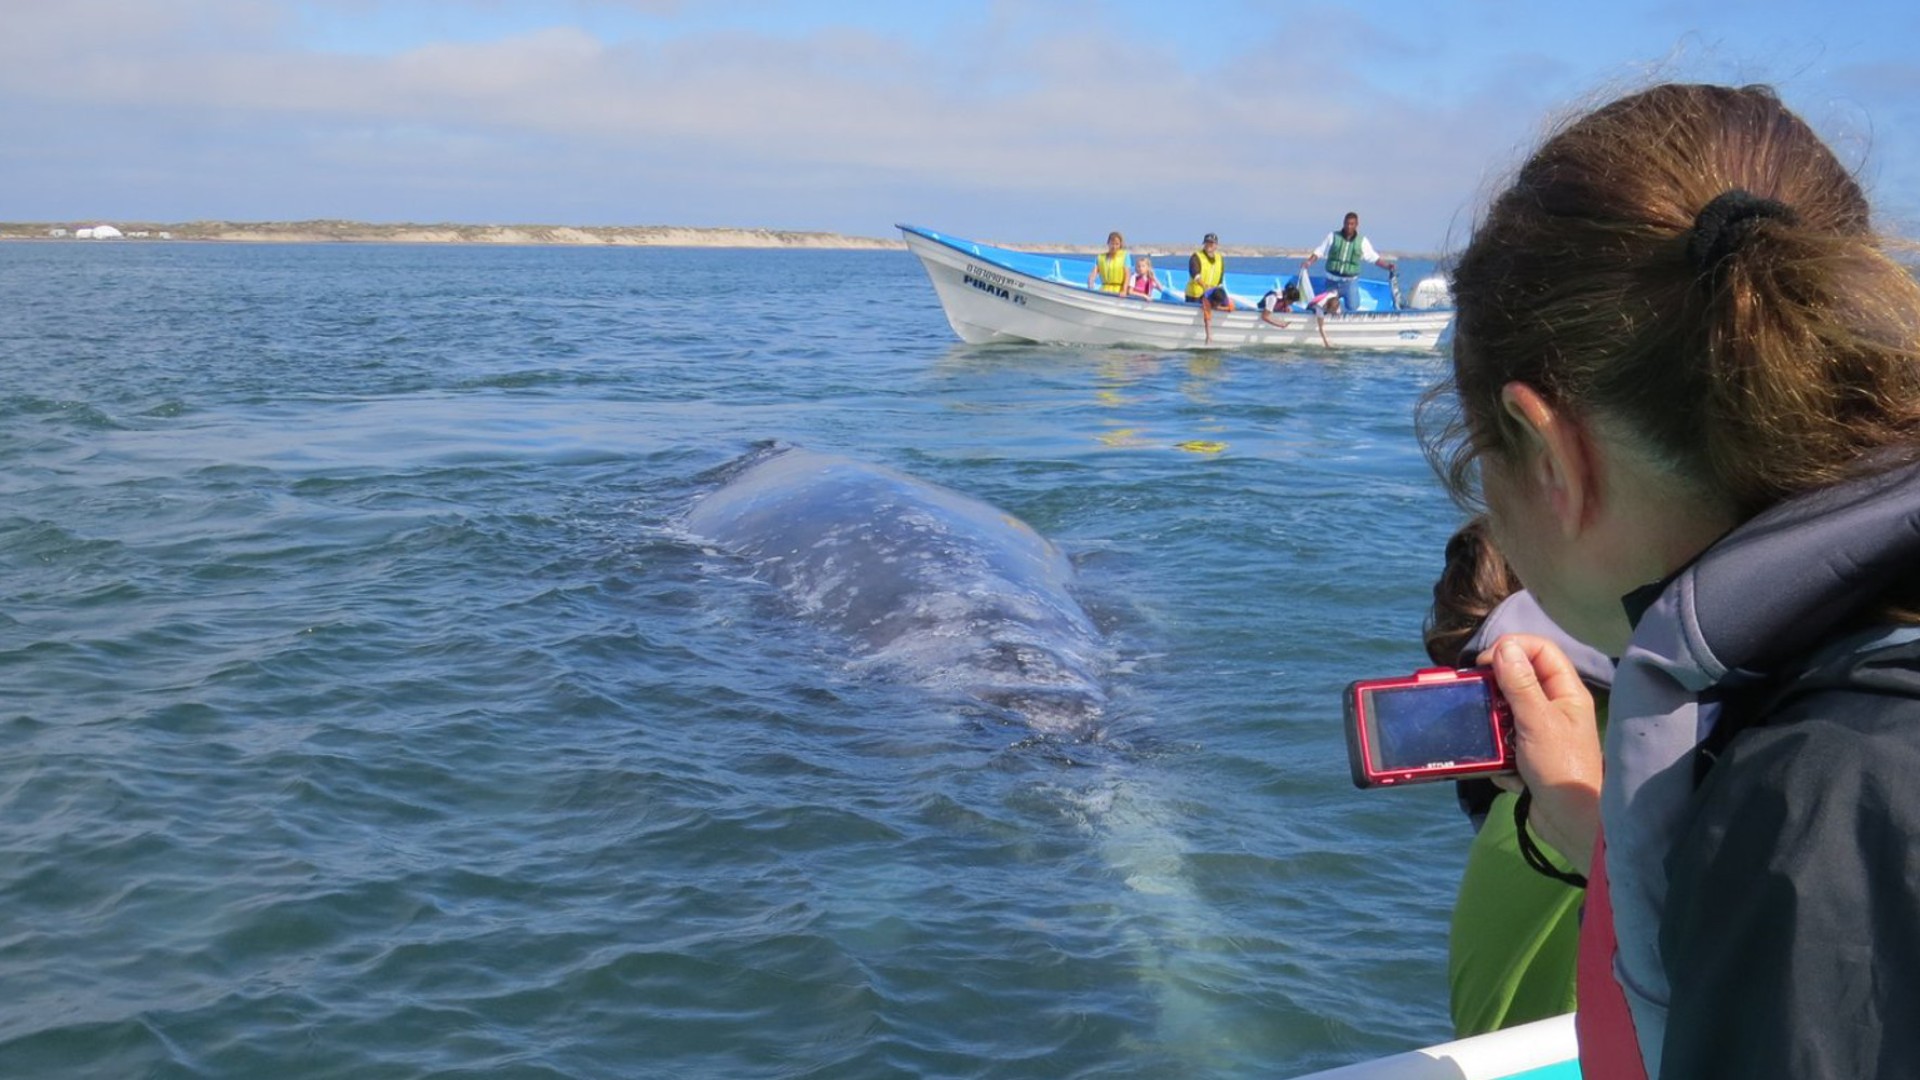 Tourist taking a picture of a gray whale from a boat on the Pacific Coast in Baja California Sur